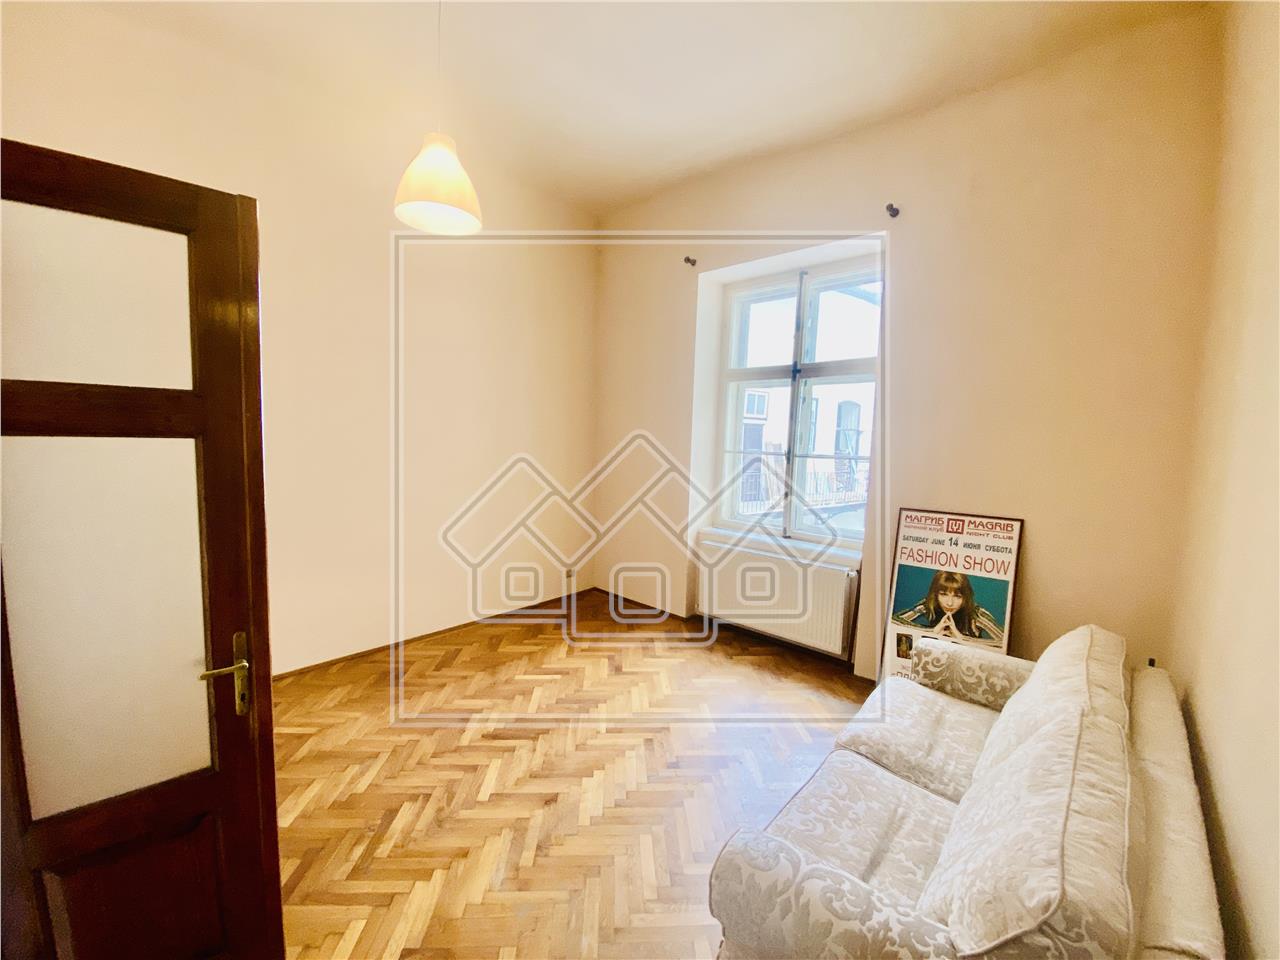 Apartment for sale in Sibiu - 3 rooms - ULTRACENTRAL - Great property